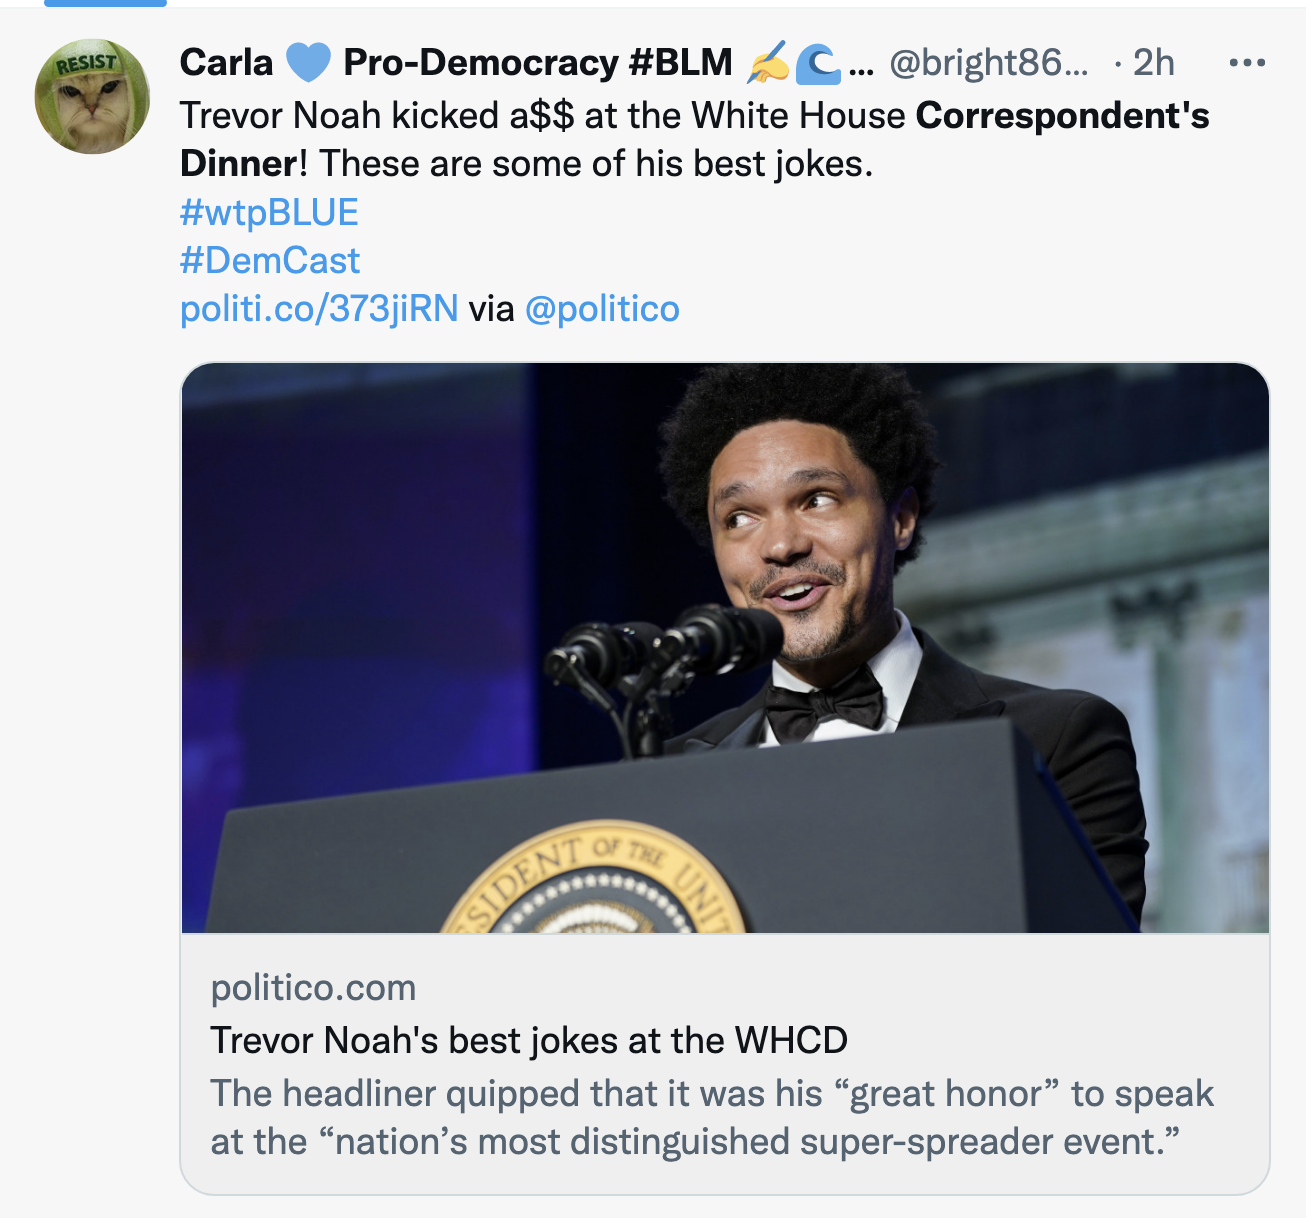 Screen-Shot-2022-05-01-at-9.55.40-AM Biden Shows Up Trump At WH Correspondence Dinner With A Zinger Featured Media Politics Social Media Top Stories 